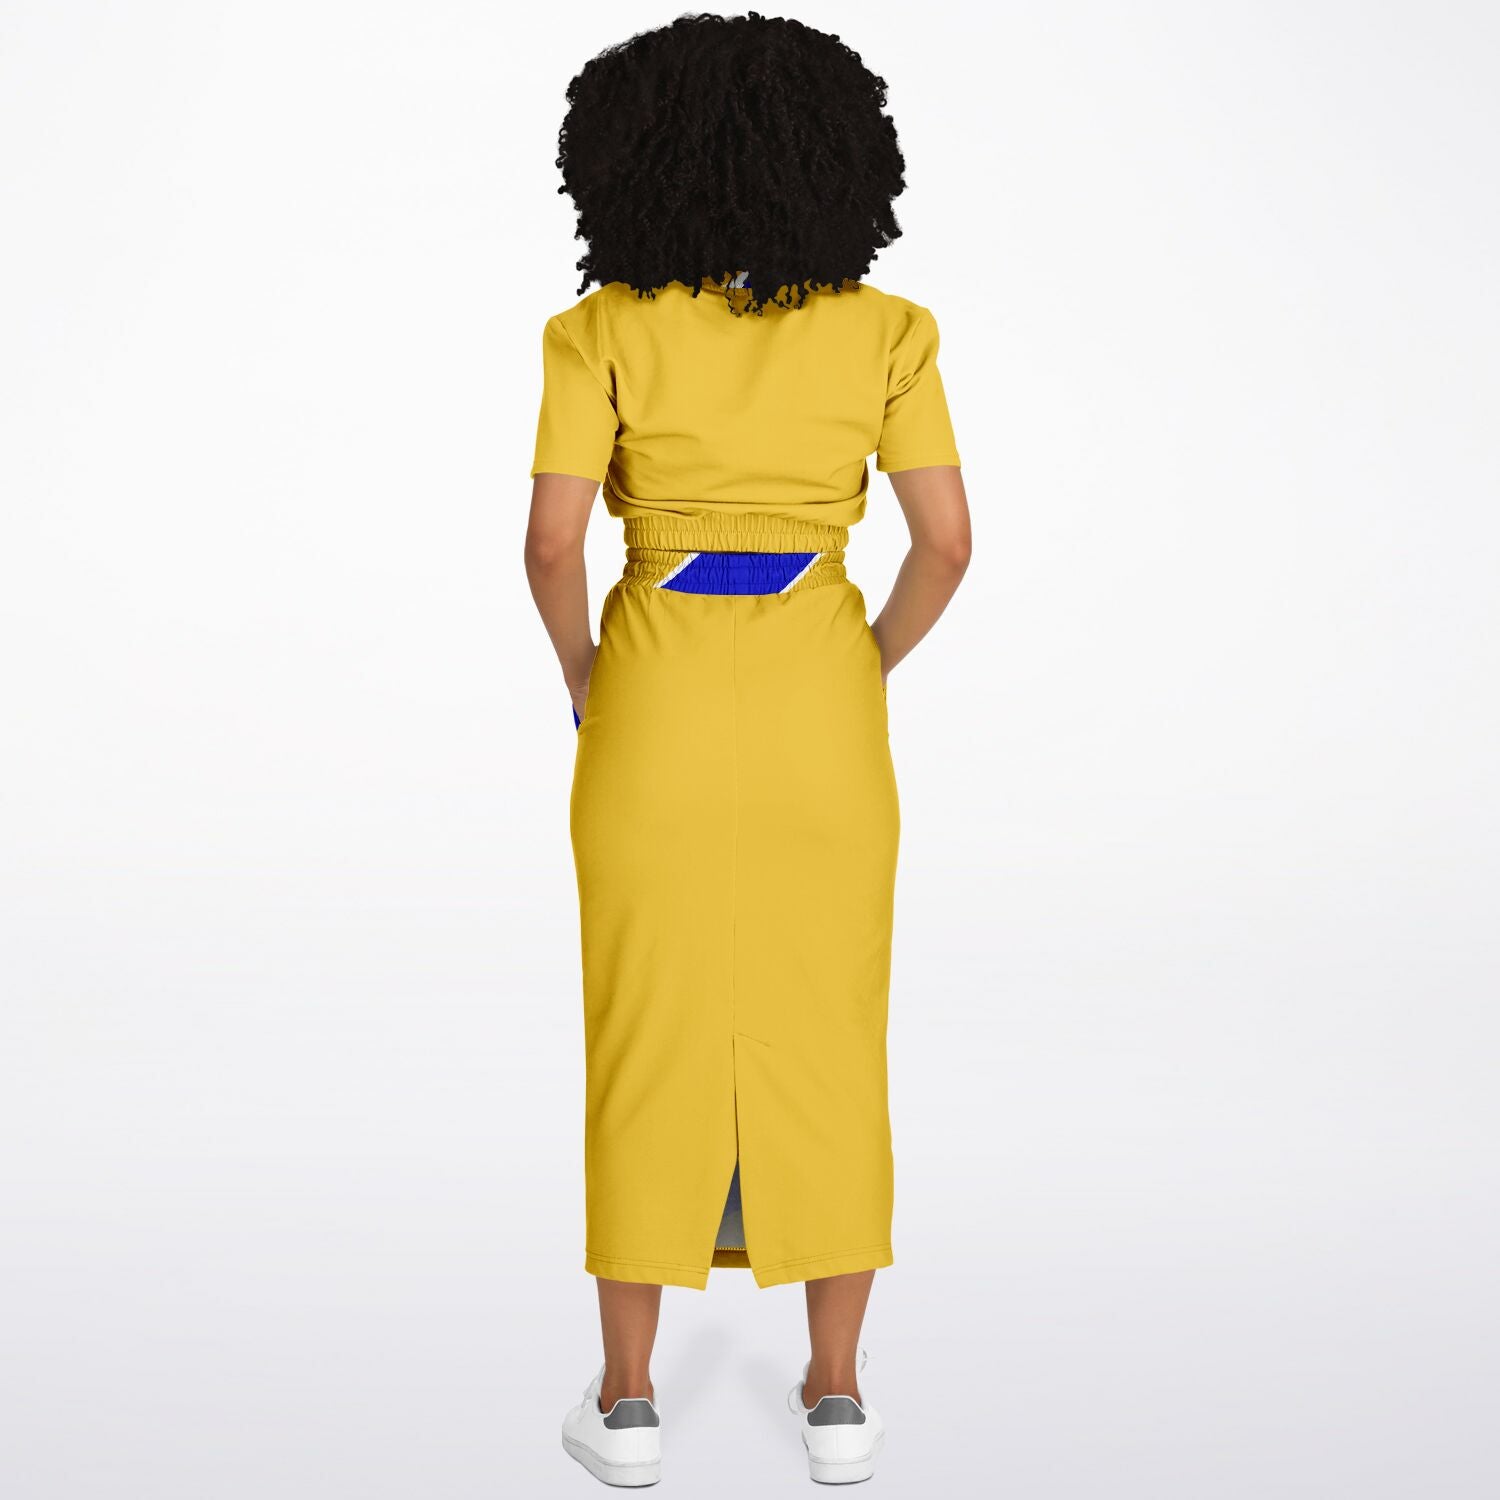 Trends Bright Blue & Gold Cropped Skirt Set